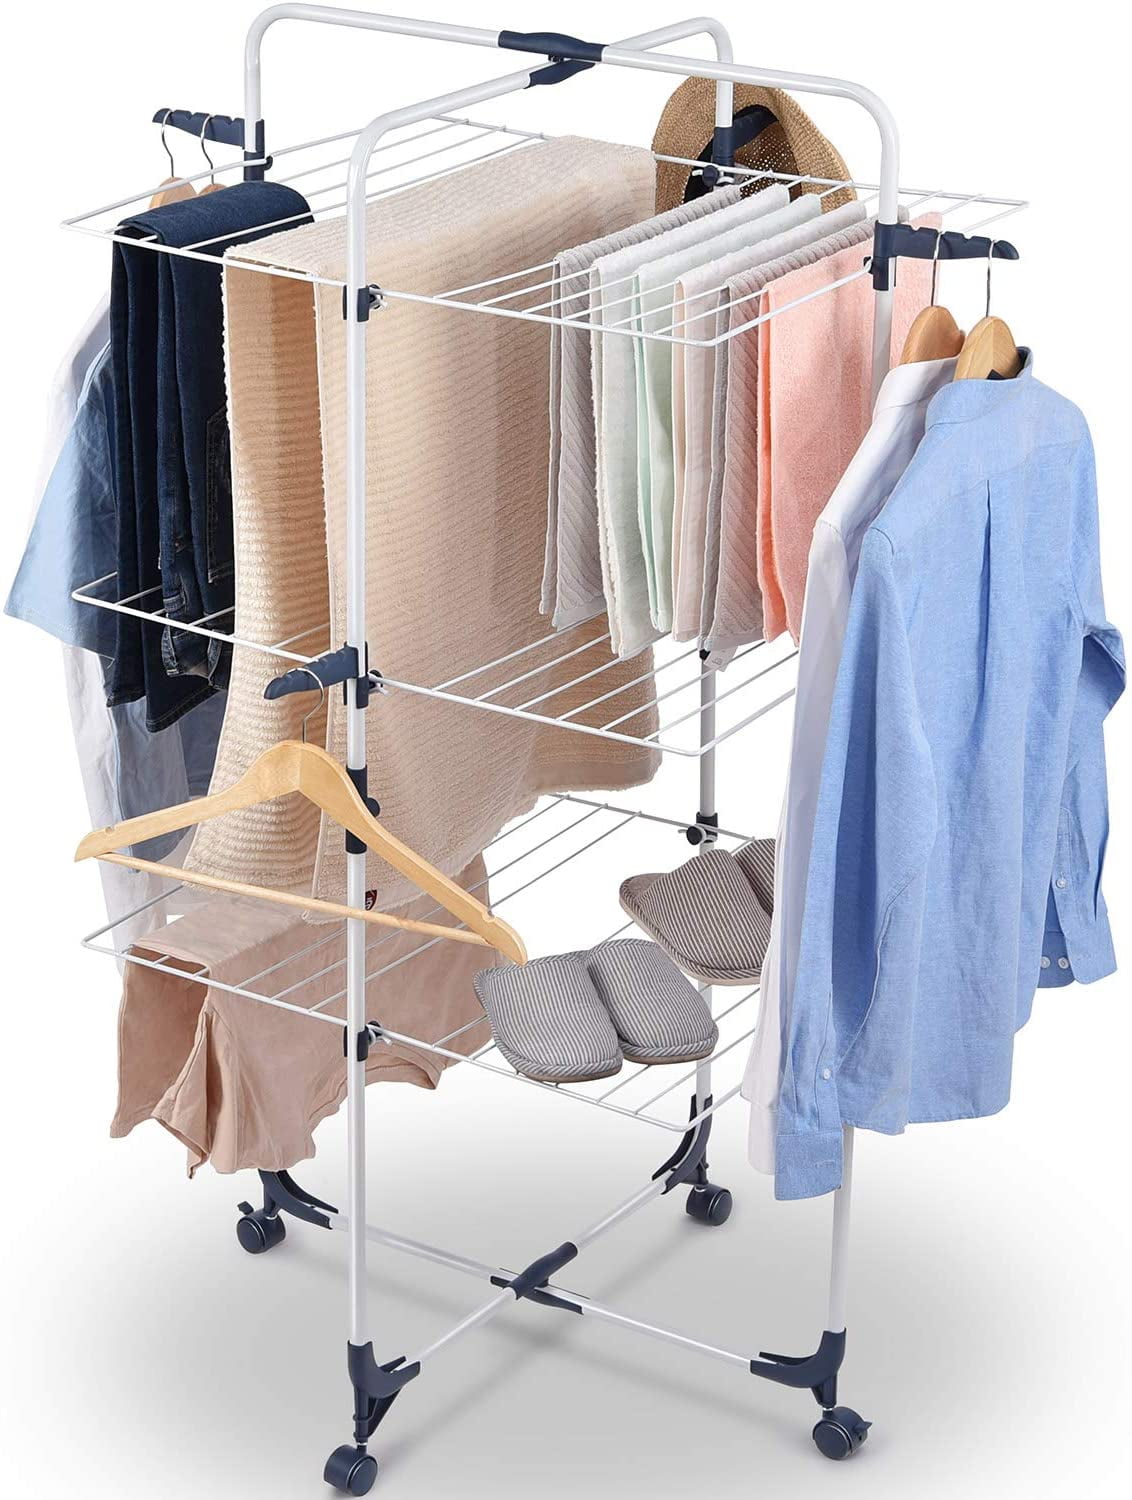 Wooden Easy Folding Laundry Clothes Drier Airer Hanger Rack Indoor Outdoor New 